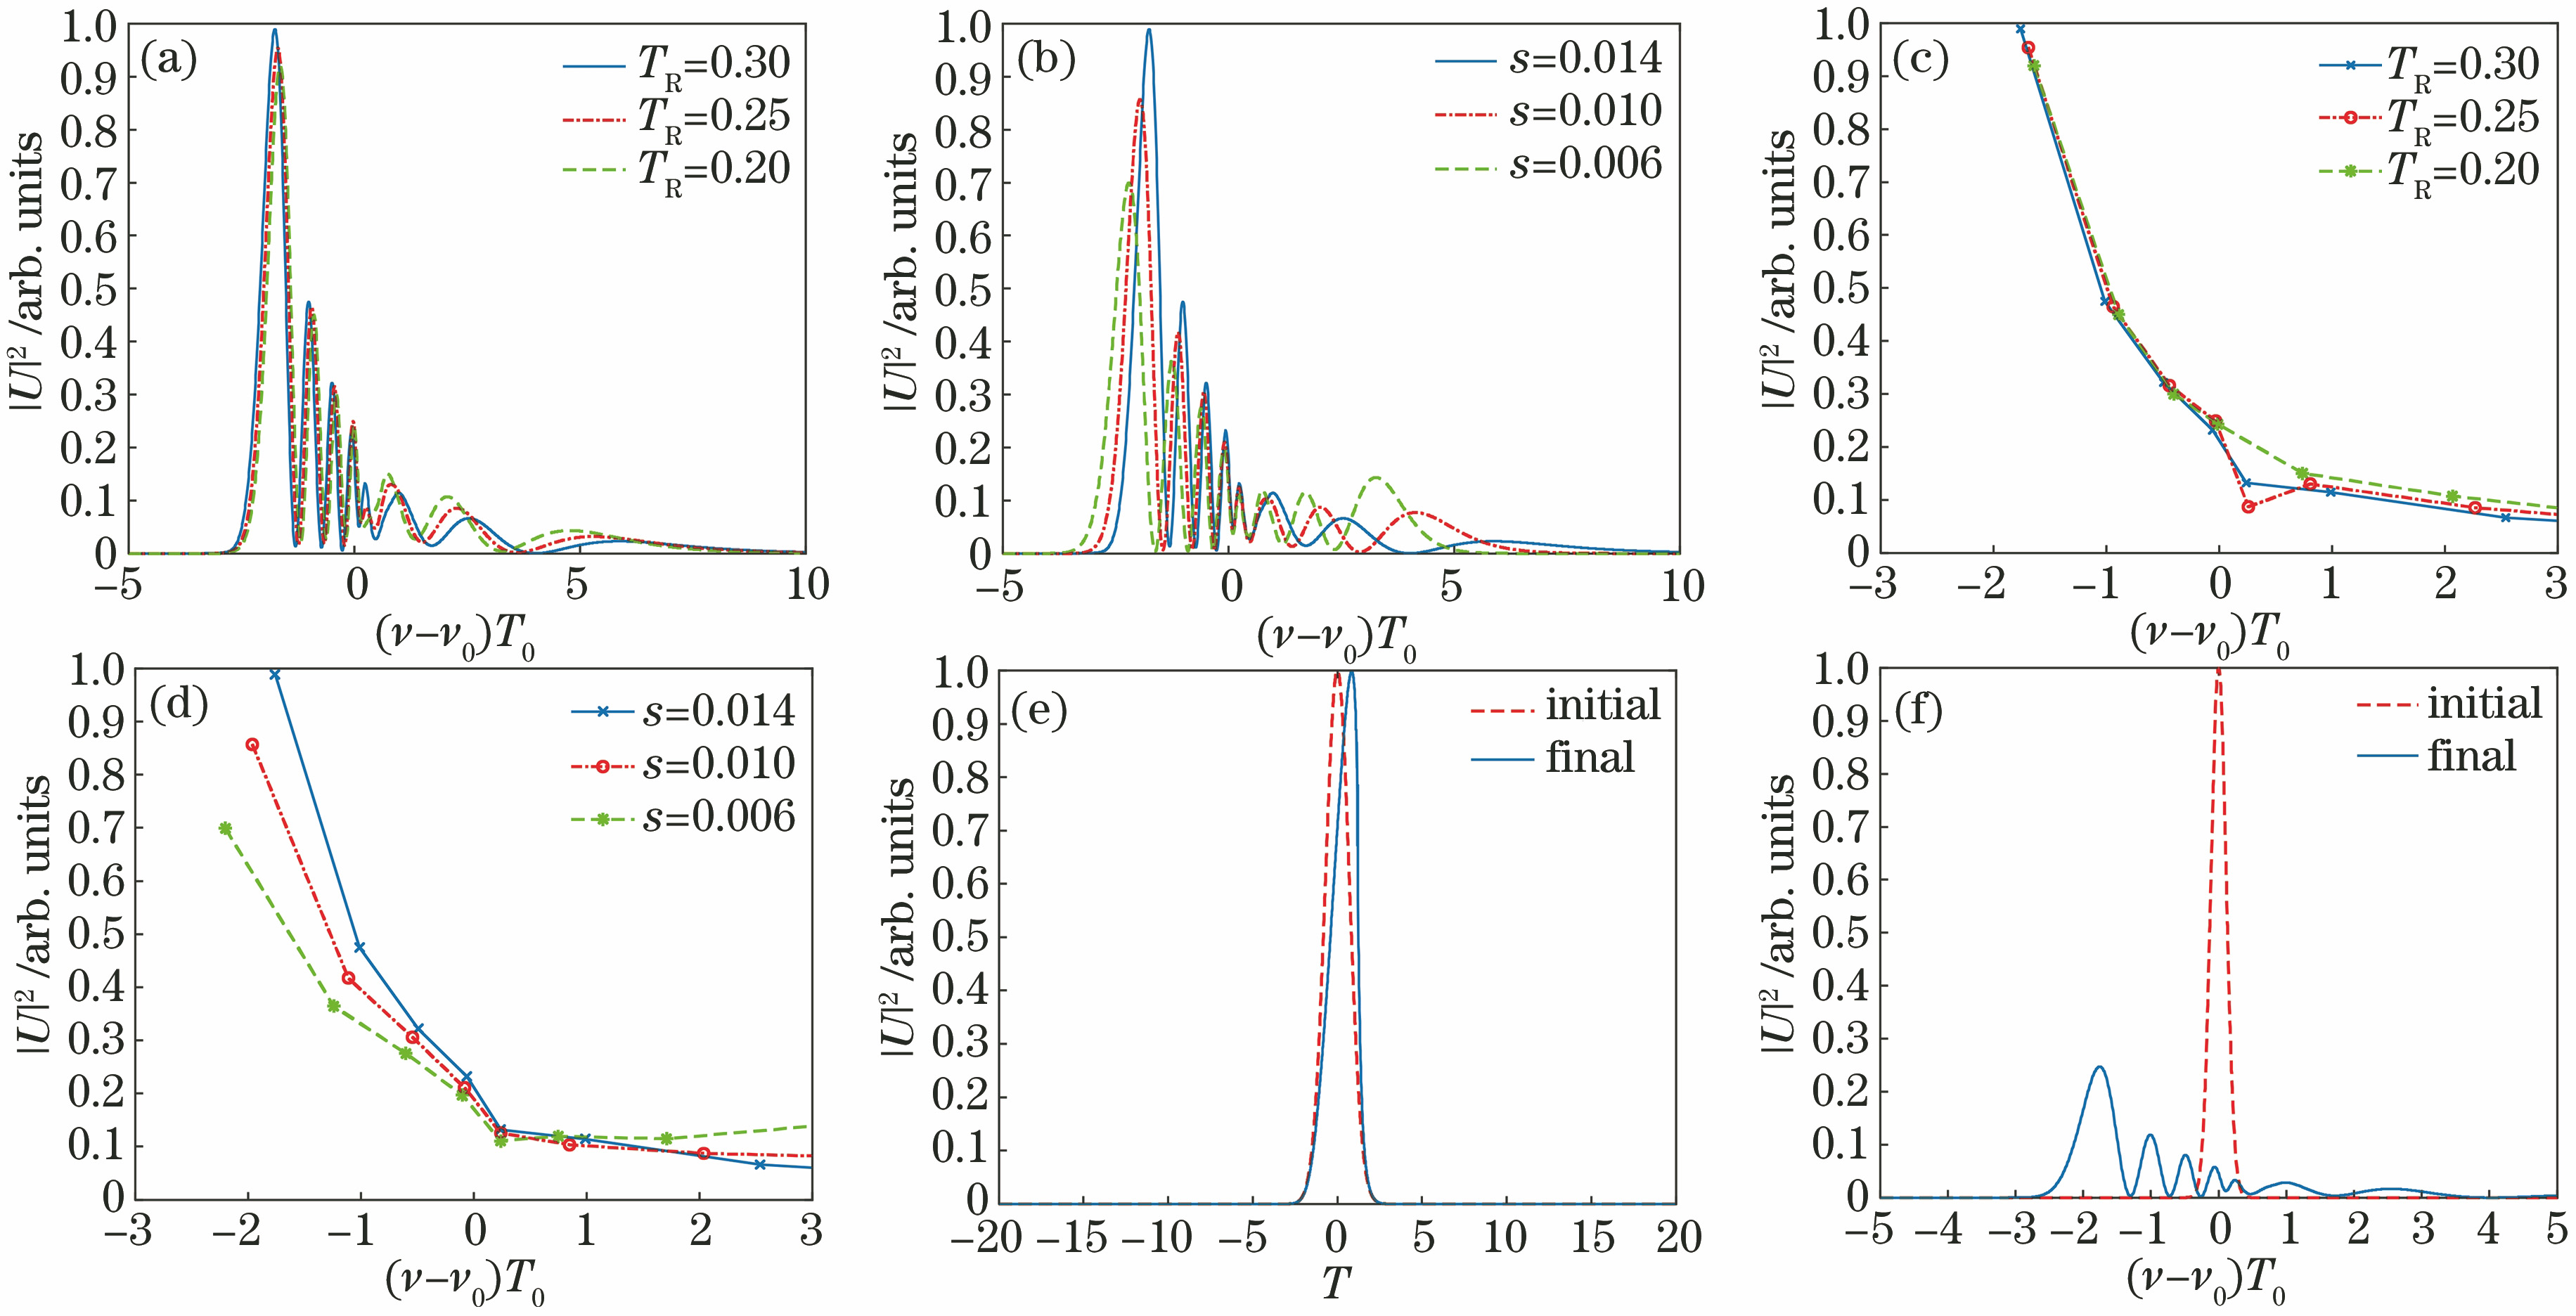 Waveform of Gaussian pulse after modulation by nonlinear effect, when z=10 km, γ=2 km-1·W-1, s=0.014 fs-1, and TR=0.3 fs-1. (a) Raman coefficient; (b) self-steepness coefficient; (c) connection diagram of spectral peak points in Fig. (a); (d) connection diagram of spectral peak points in Fig. (b); (e) pulse time domain envelope; (f) spectrum diagram